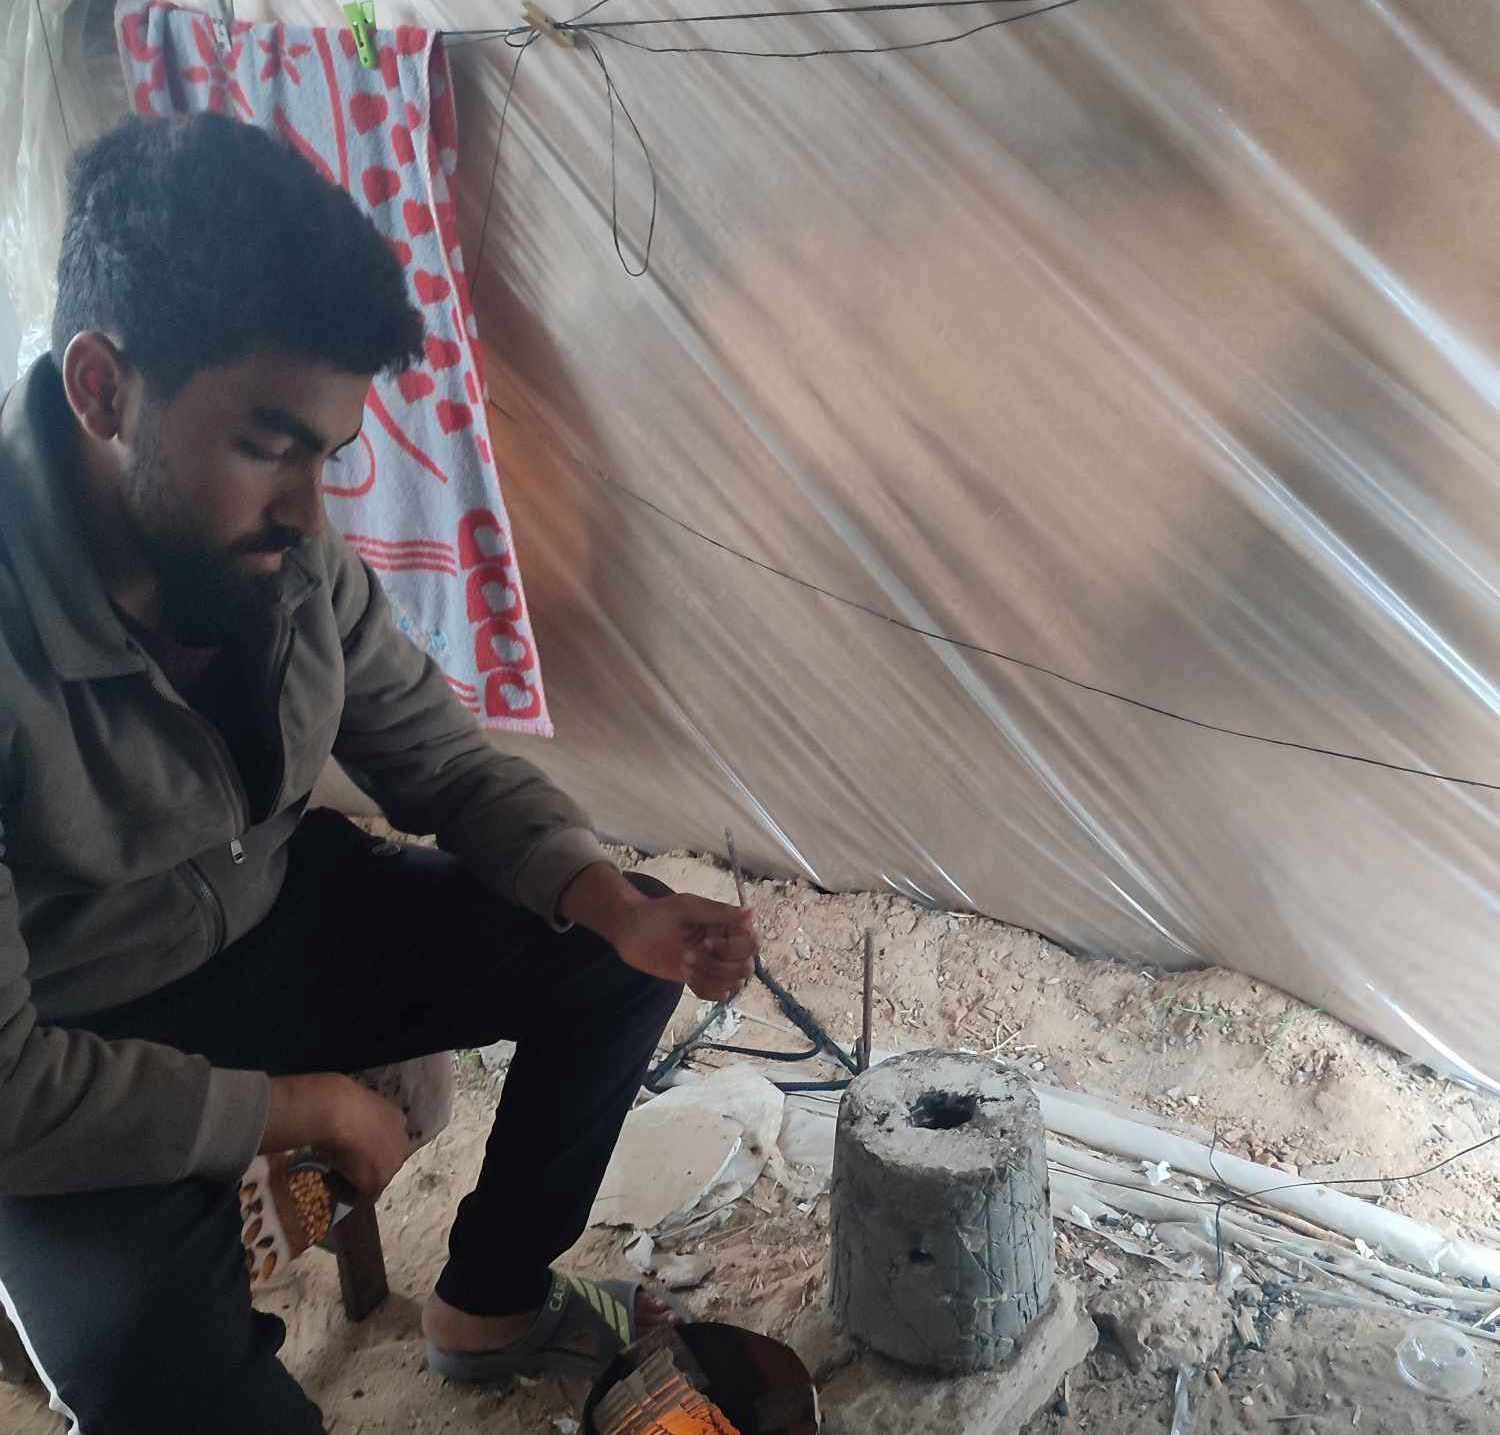 Salim Ghayyda's family have been forced to live as refugees in makeshift tents.